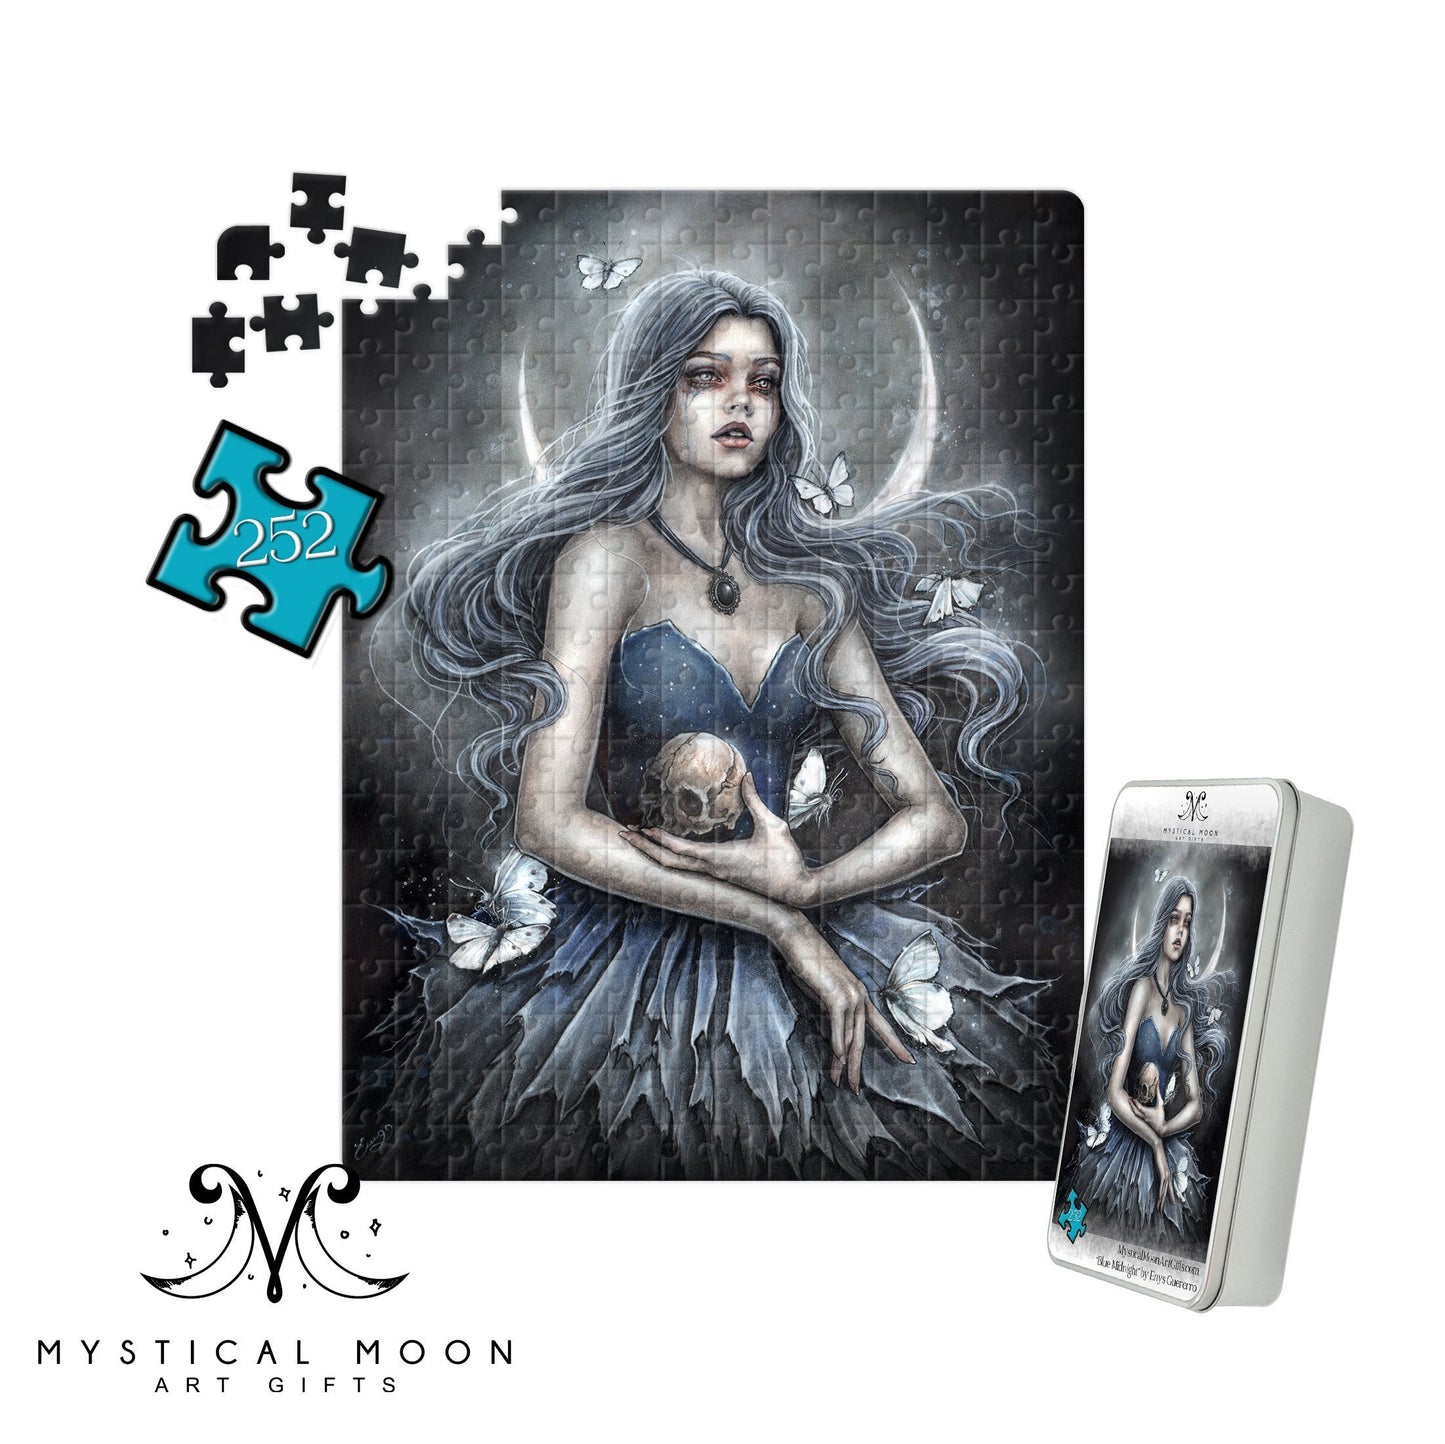 Blue Midnight by Enys Guerrero. 252 Piece Puzzle